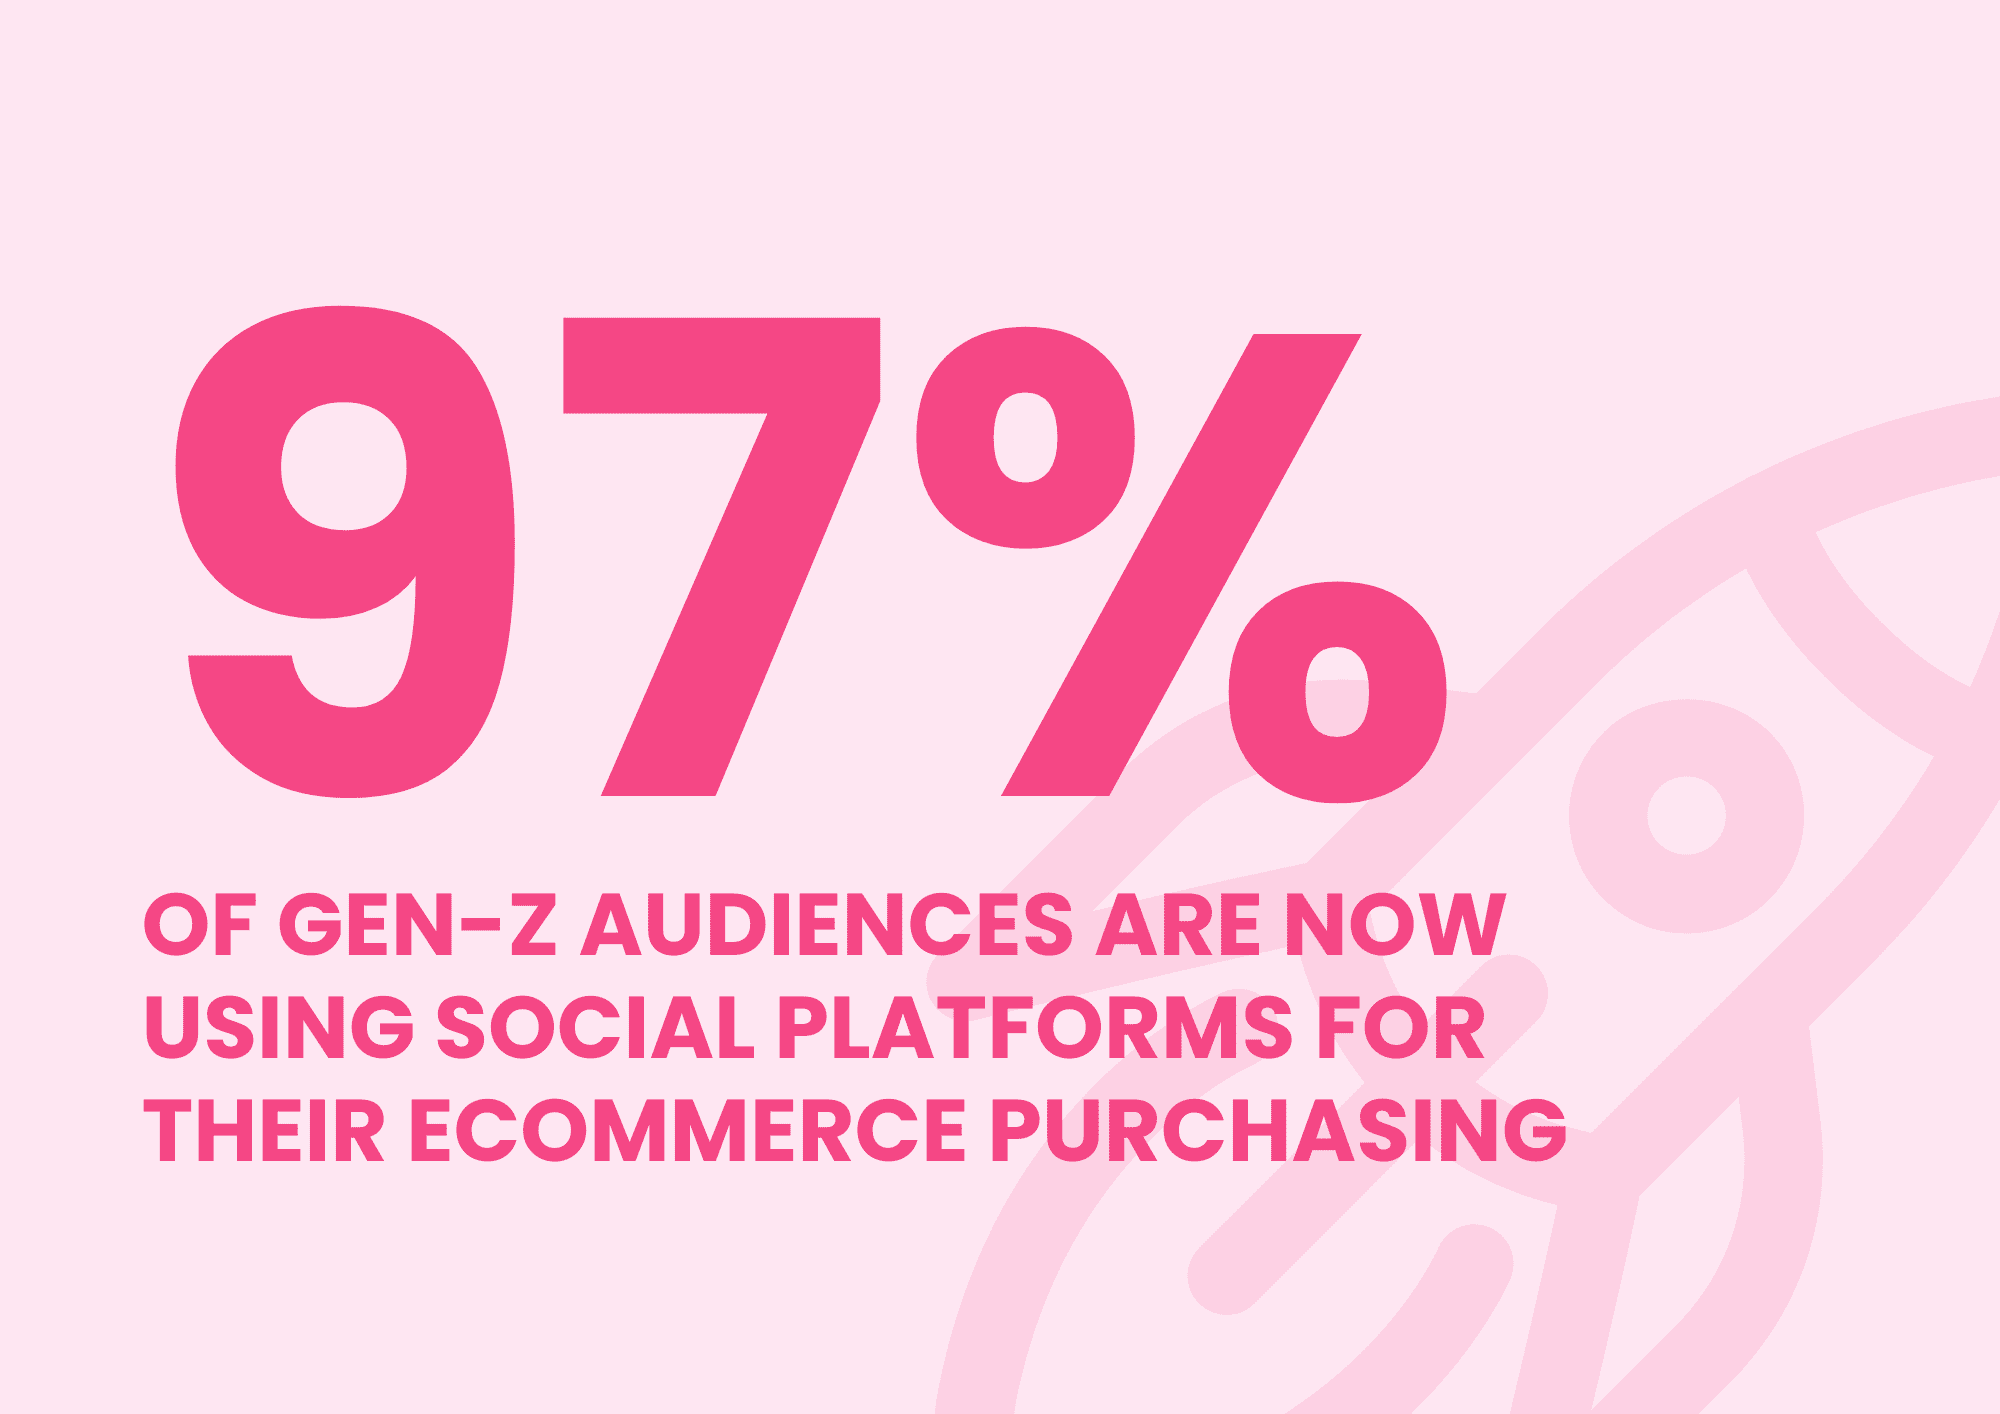 TikTok Metric Graphic: 97% of Gen-Z audiences are using social platforms for eCommerce purchases